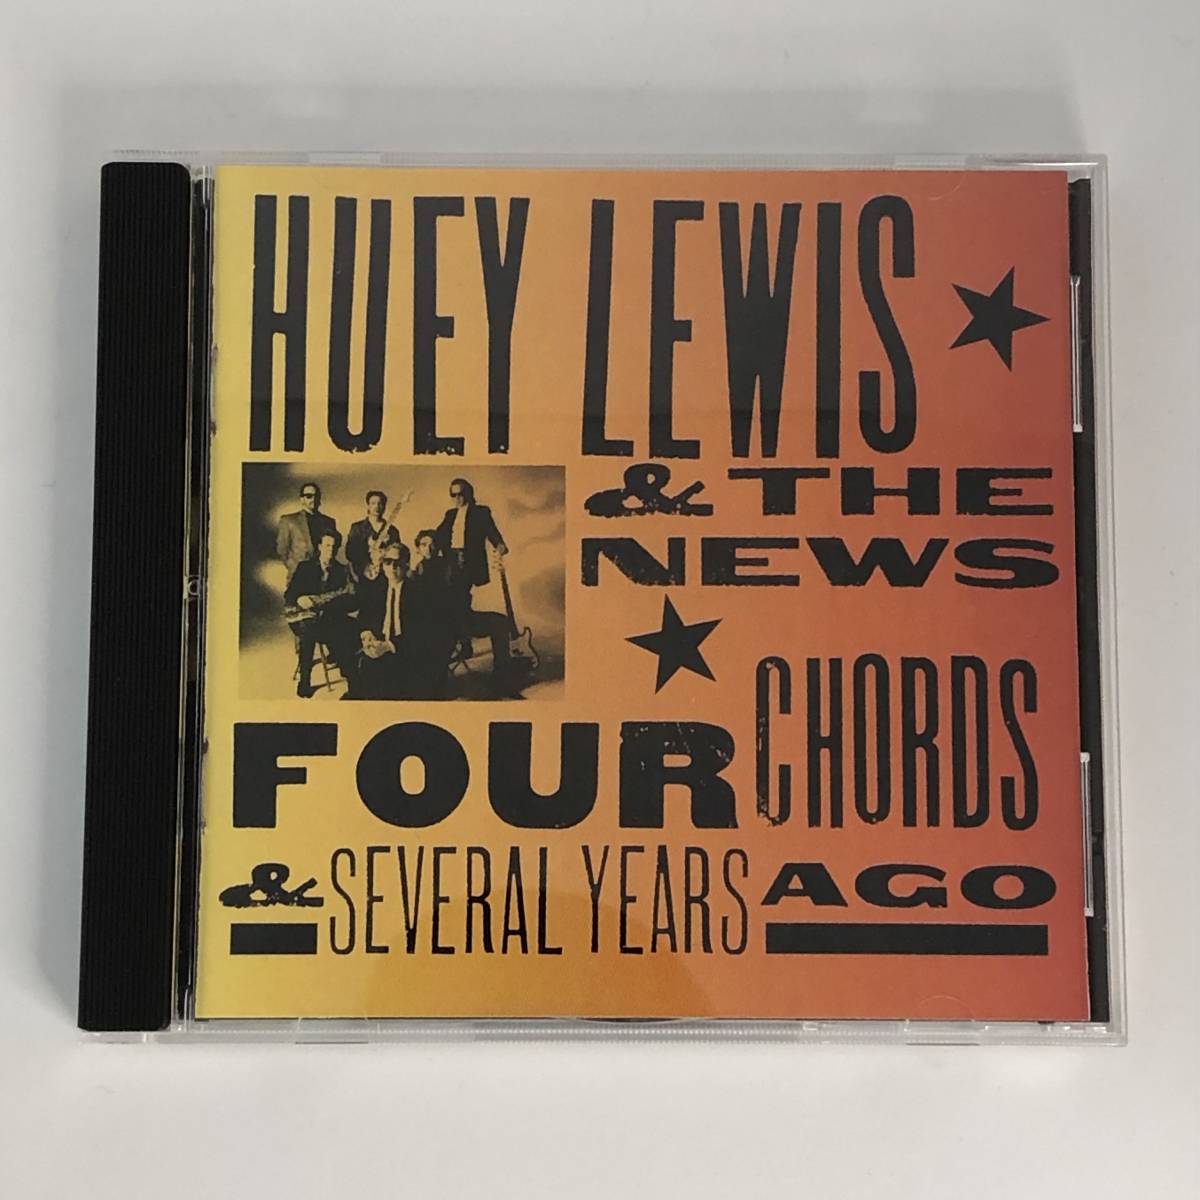 US盤 中古CD Huey Lewis And The News Four Chords & Several Years Ago ヒューイ・ルイス・アンド・ザ・ニュース 個人所有 (e_画像1